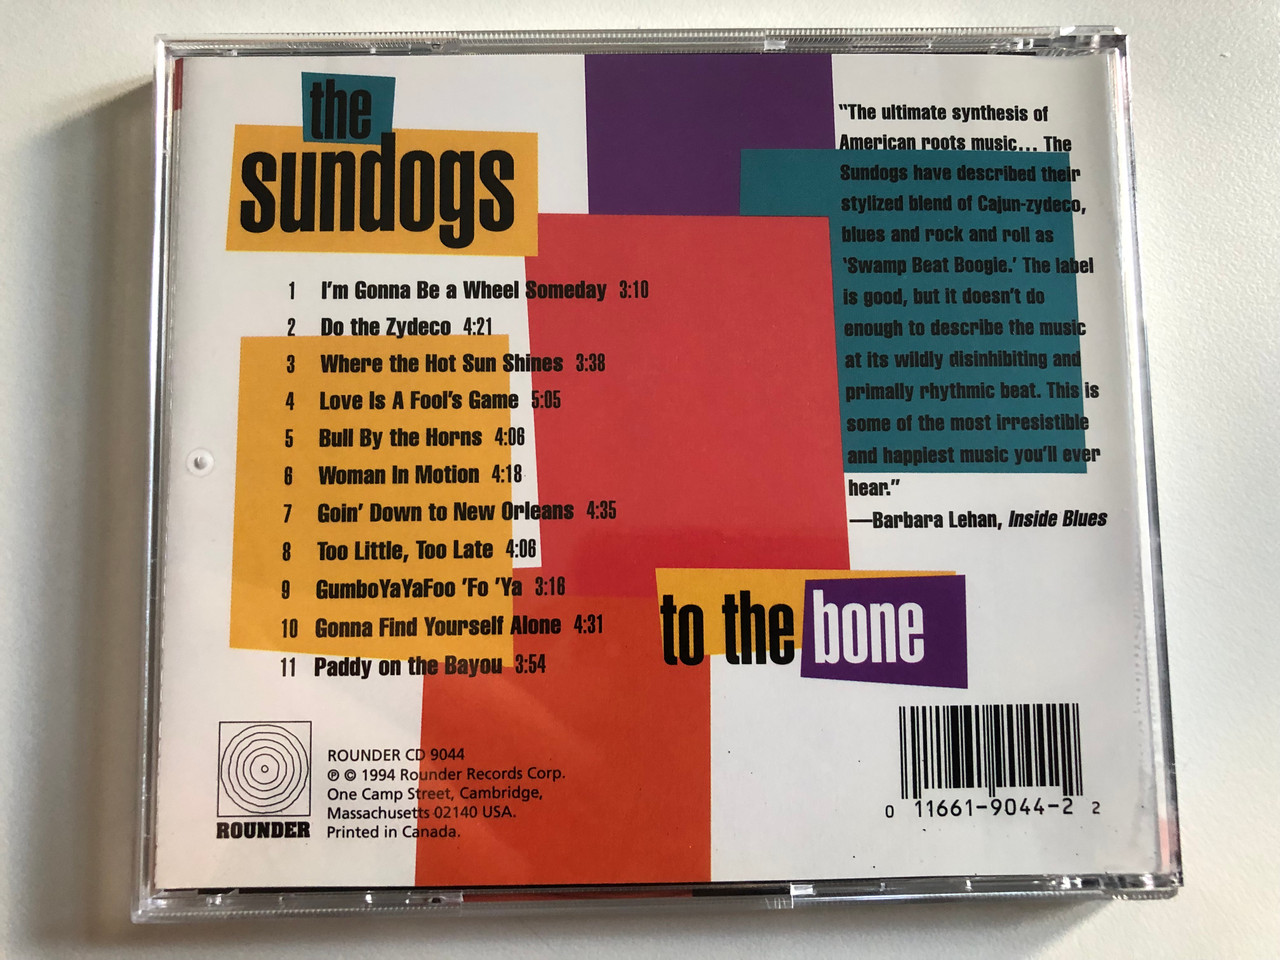 https://cdn10.bigcommerce.com/s-62bdpkt7pb/products/0/images/313860/The_Sundogs_To_The_Bone_Rounder_Records_Audio_CD_1994_CD_9044_2__60817.1701091558.1280.1280.JPG?c=2